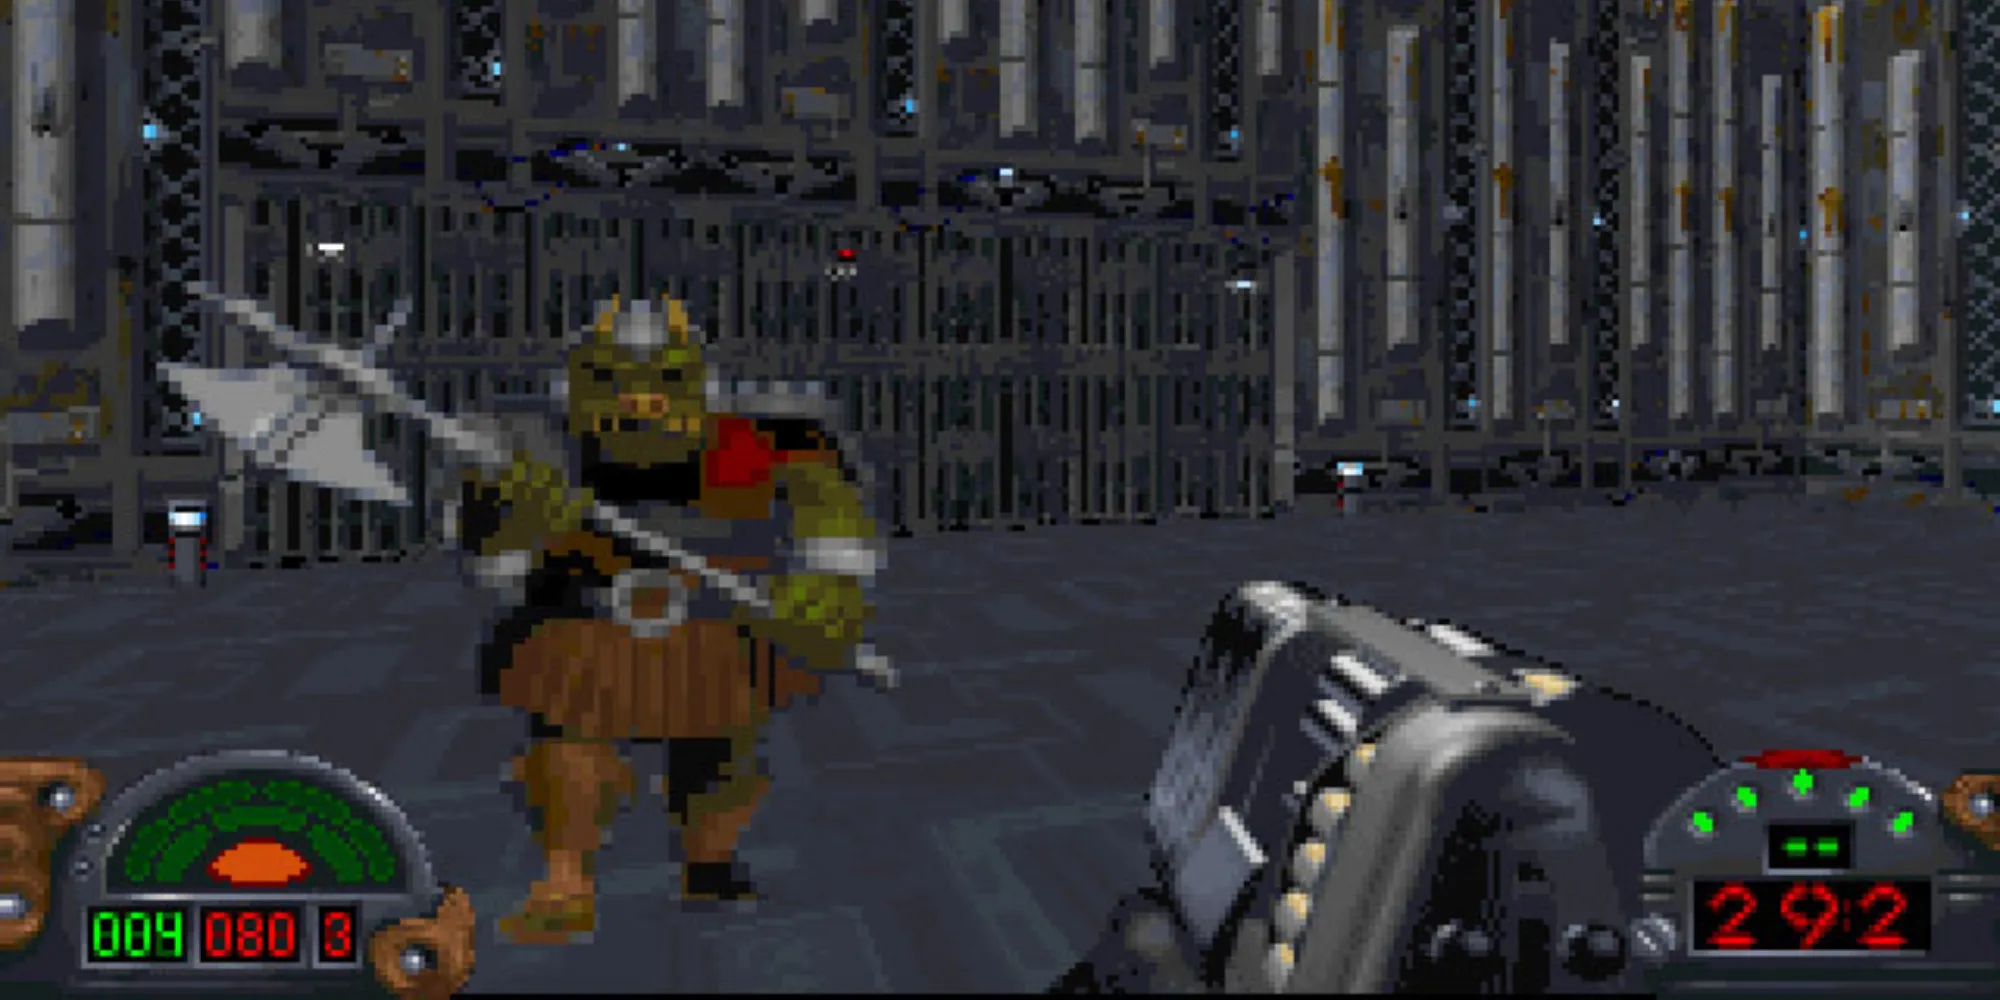 A player shooting at a guard in Star Wars Dark Forces